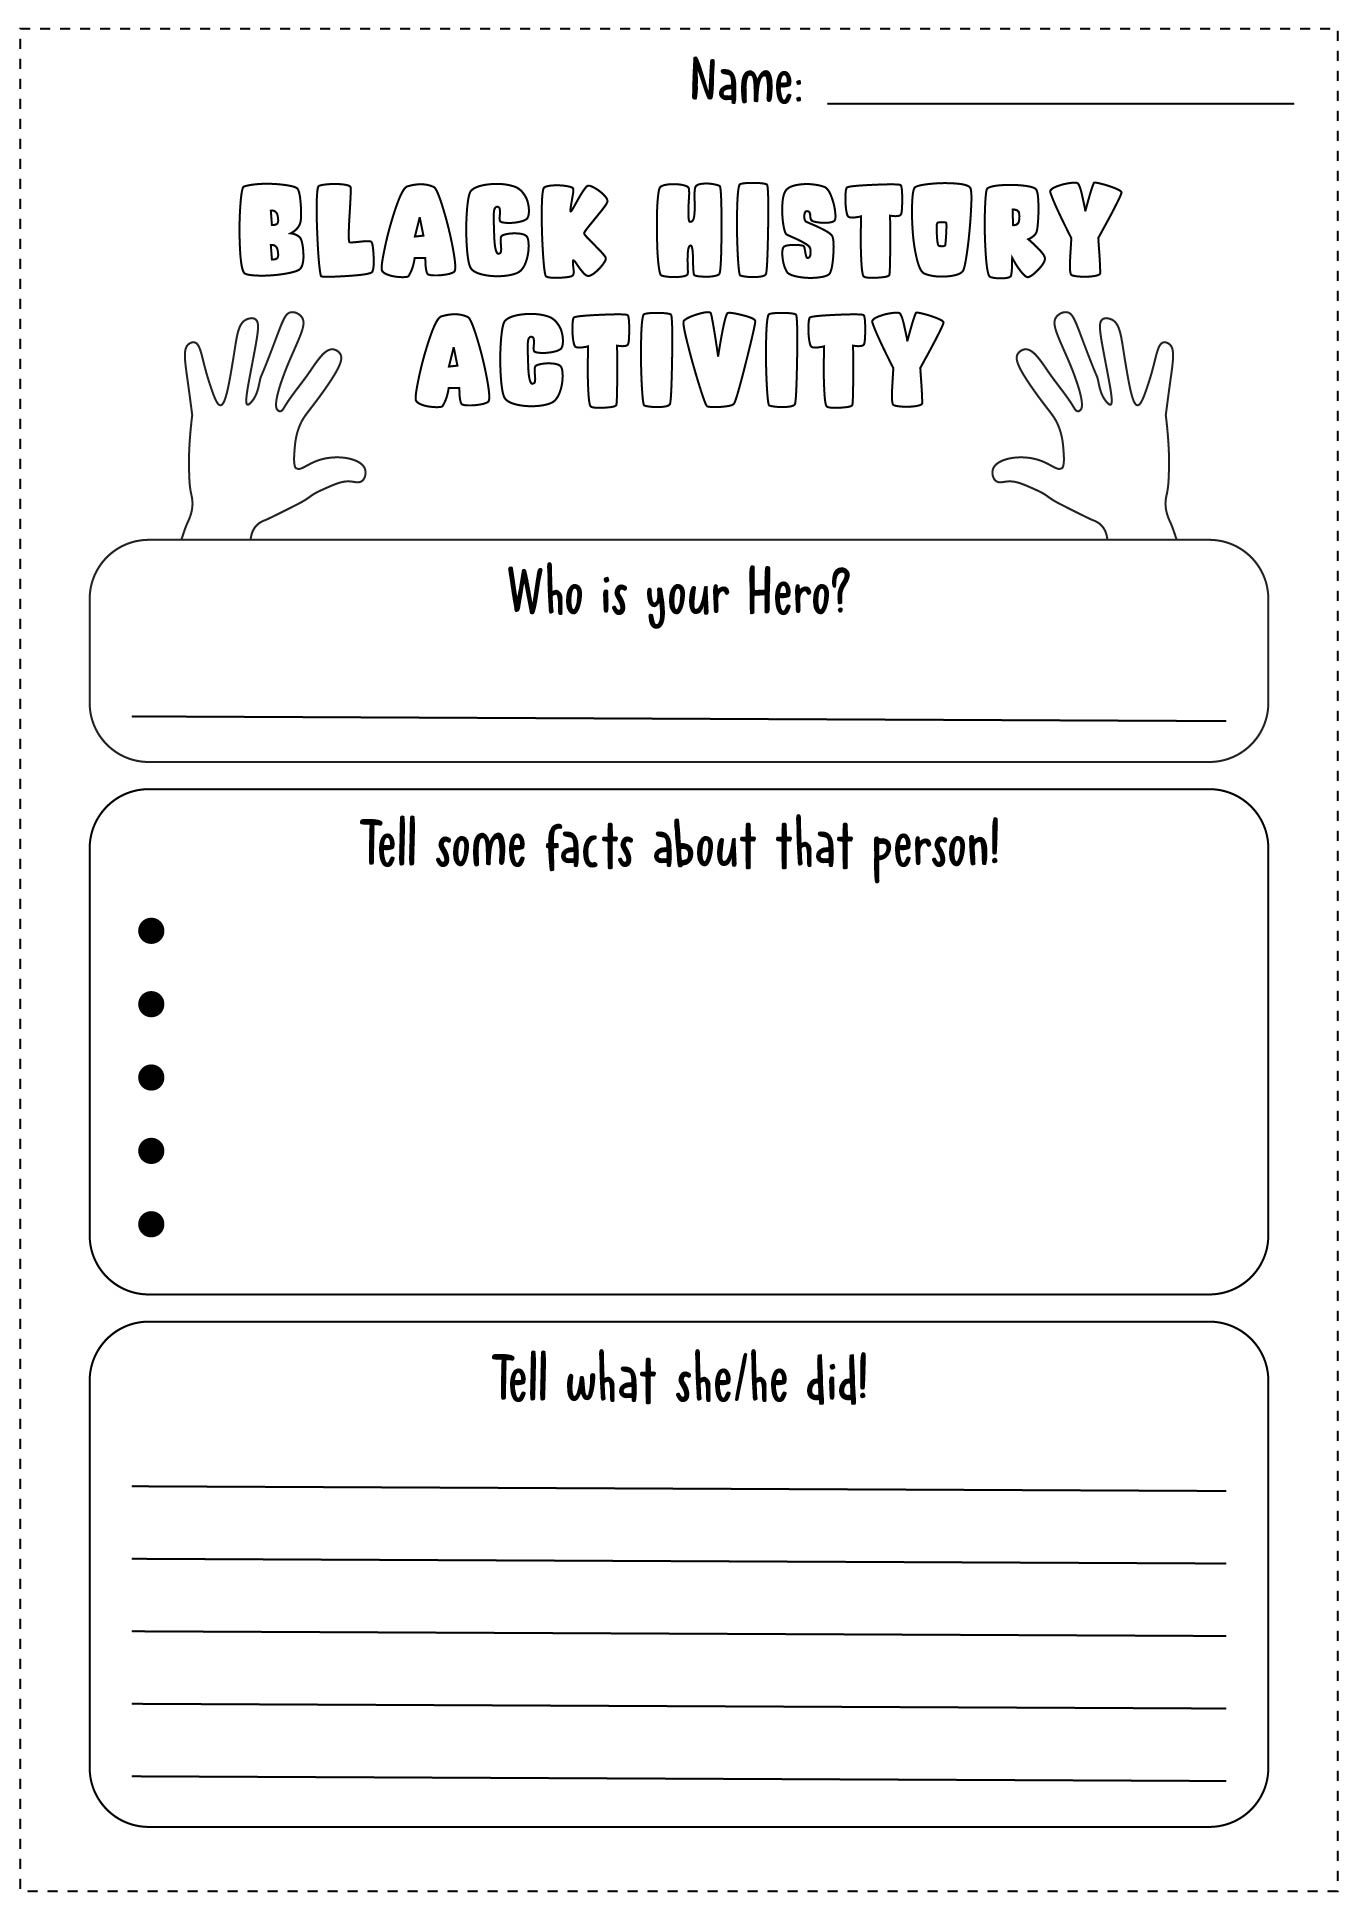 Free Printable Black History Month Worksheets For Elementary Students